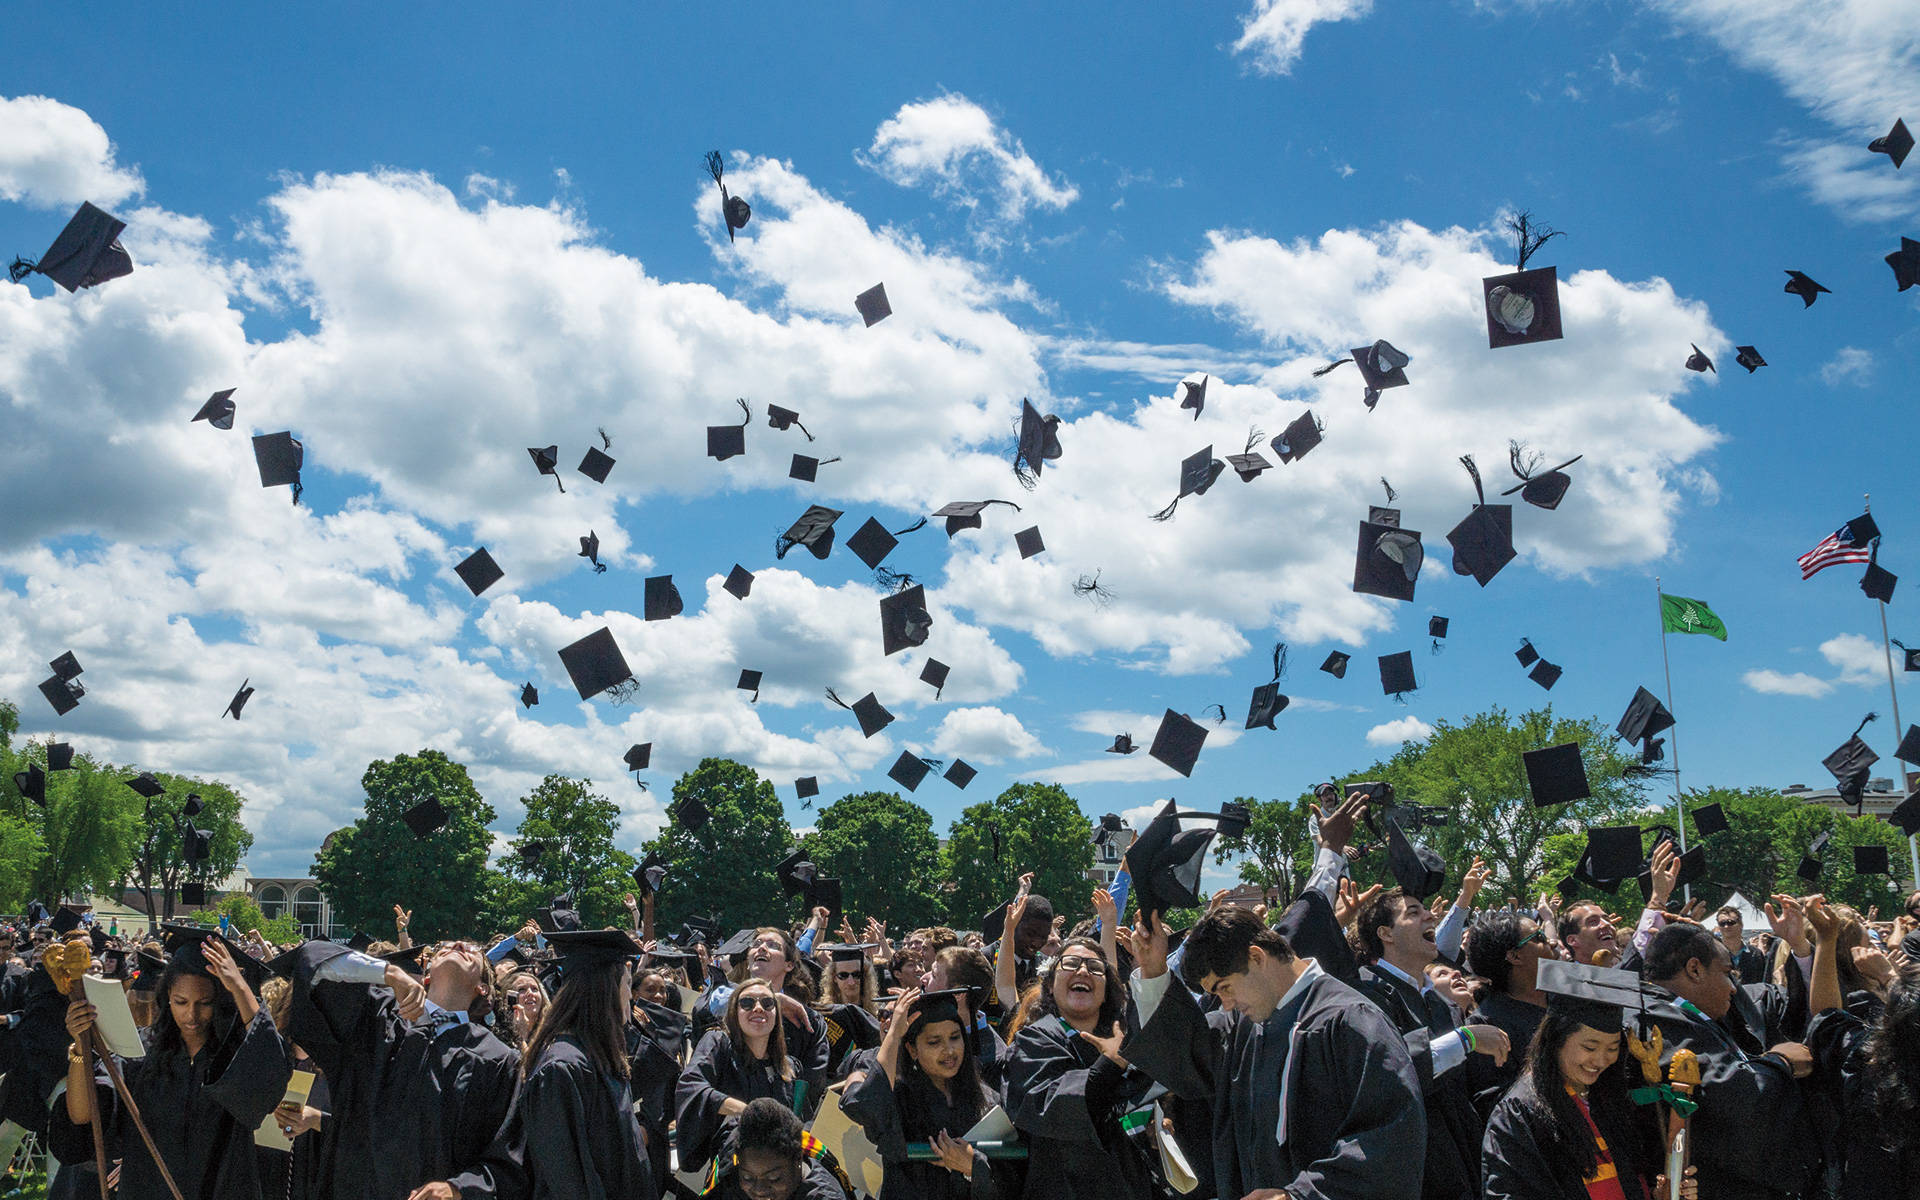 Download Dartmouth College Commencement Ceremony Wallpaper